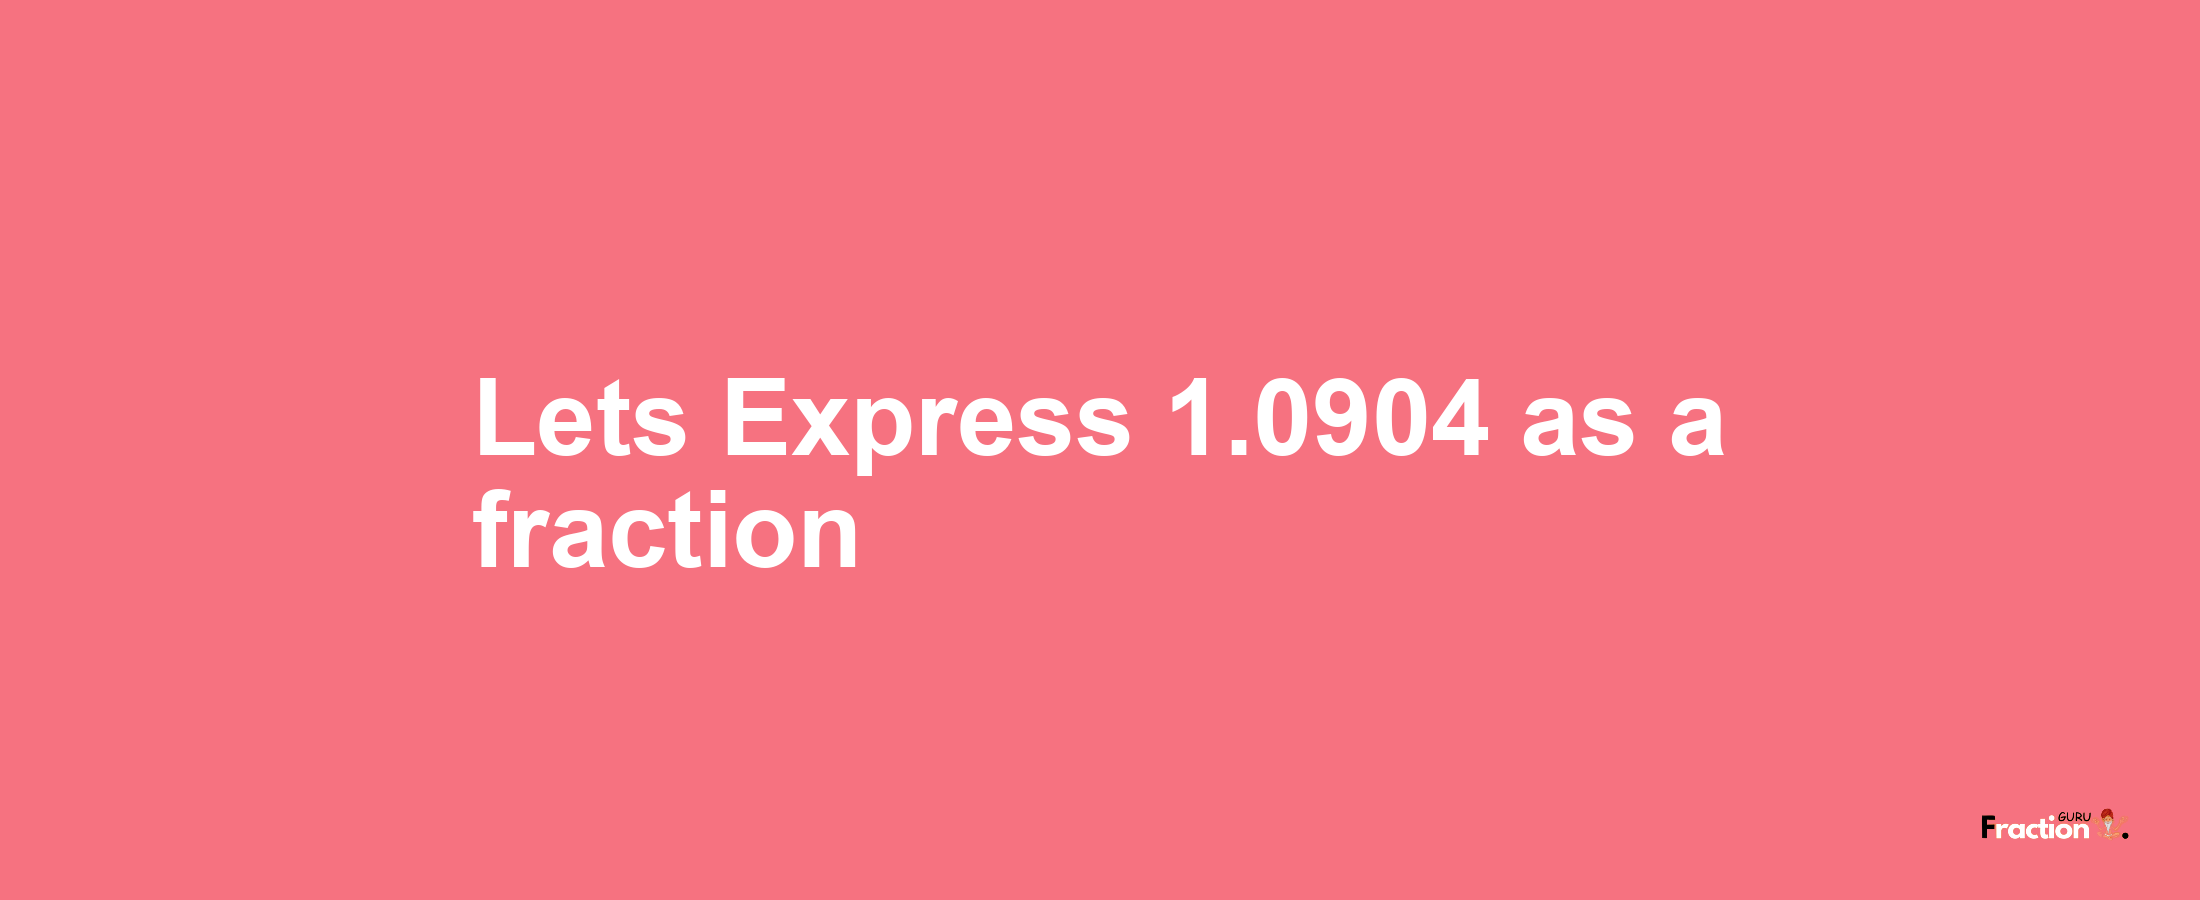 Lets Express 1.0904 as afraction